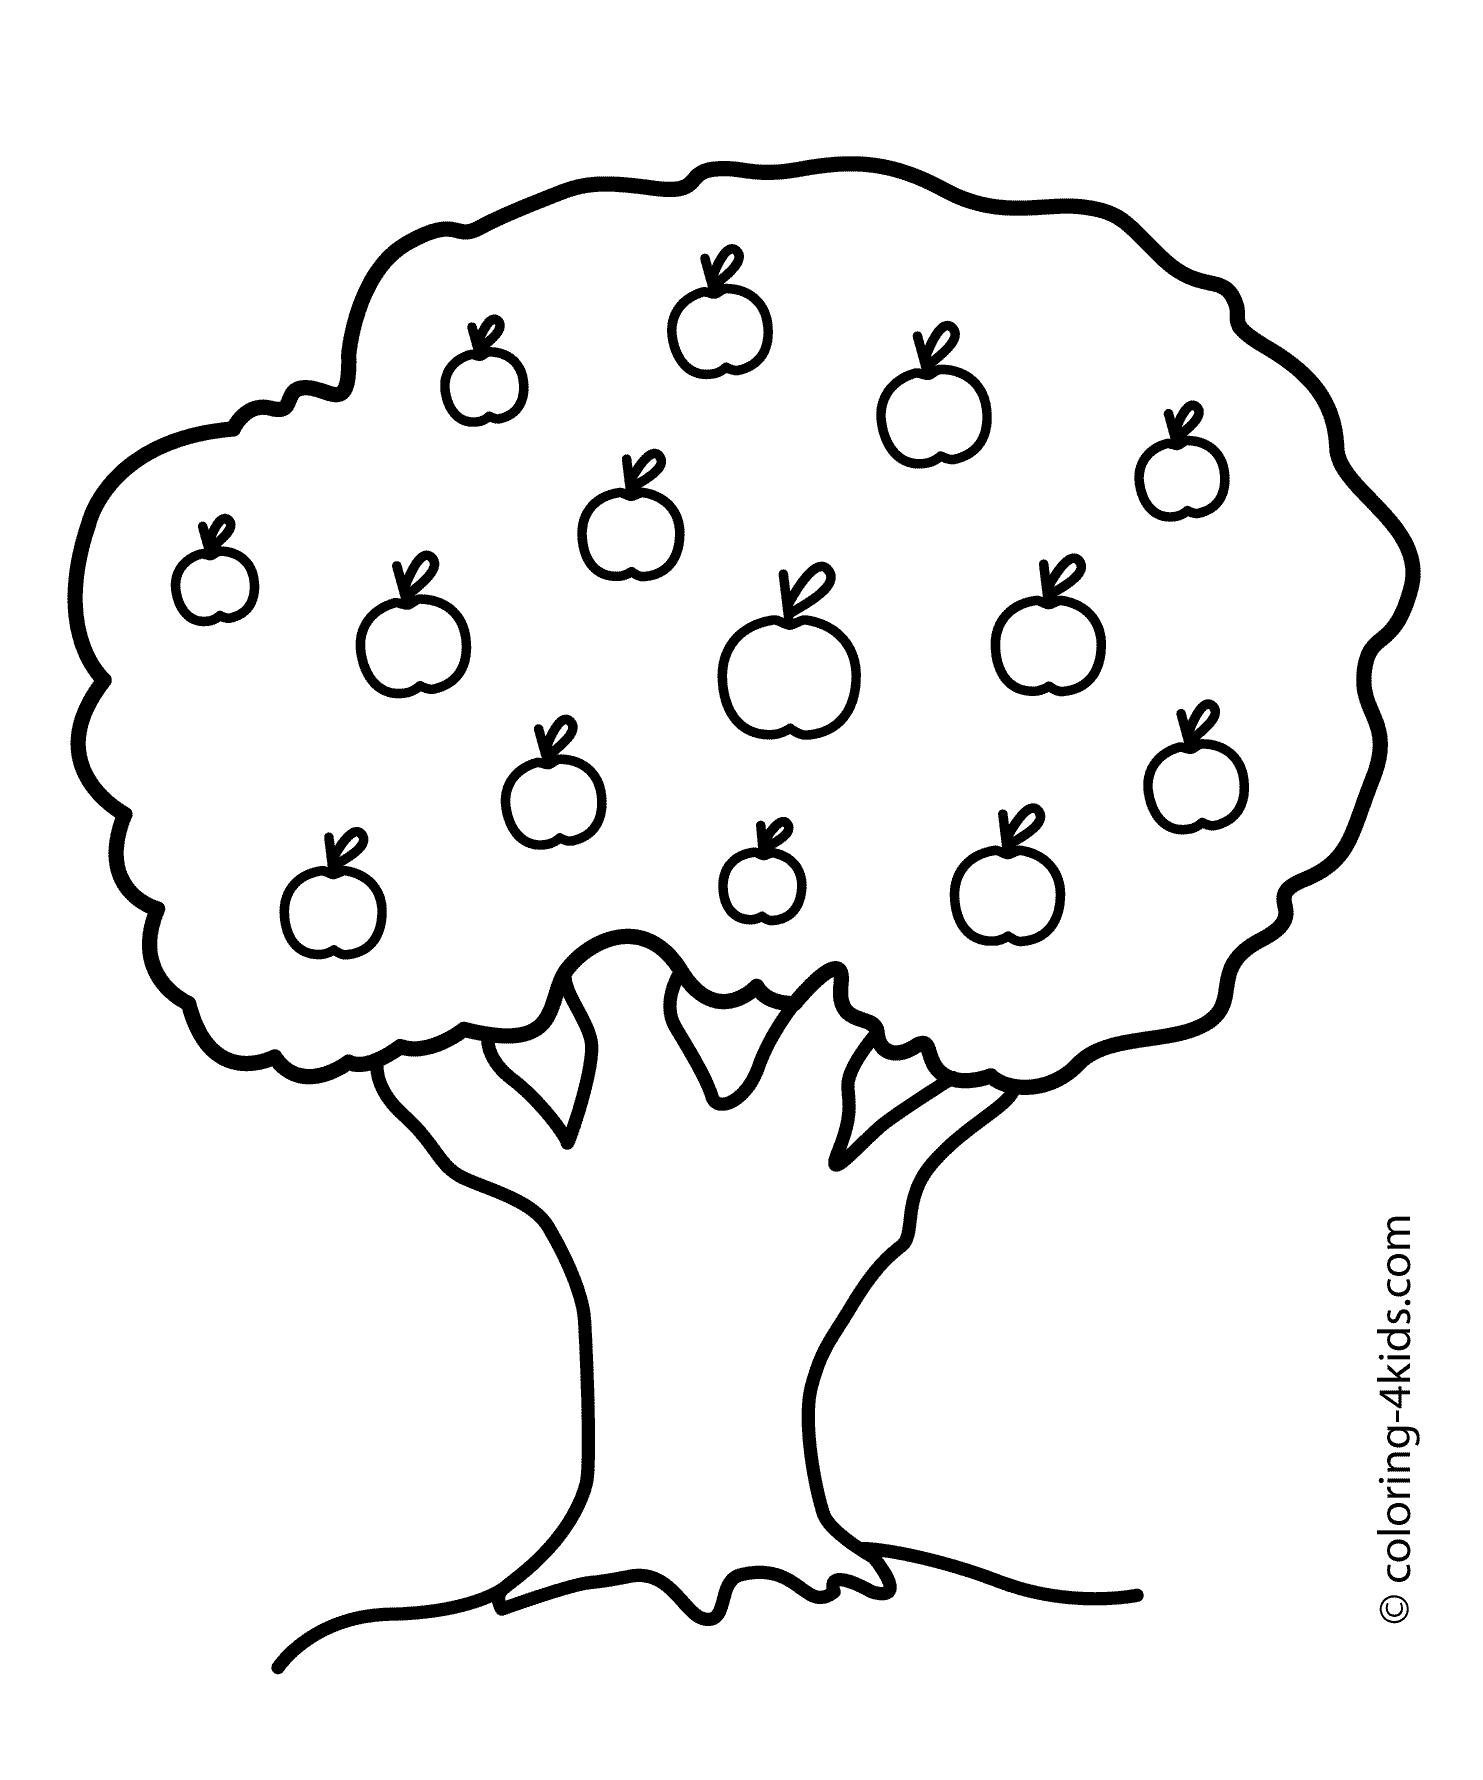 coloring pages of fruit trees nature apple tree coloring page for kids printable free trees fruit coloring pages of 